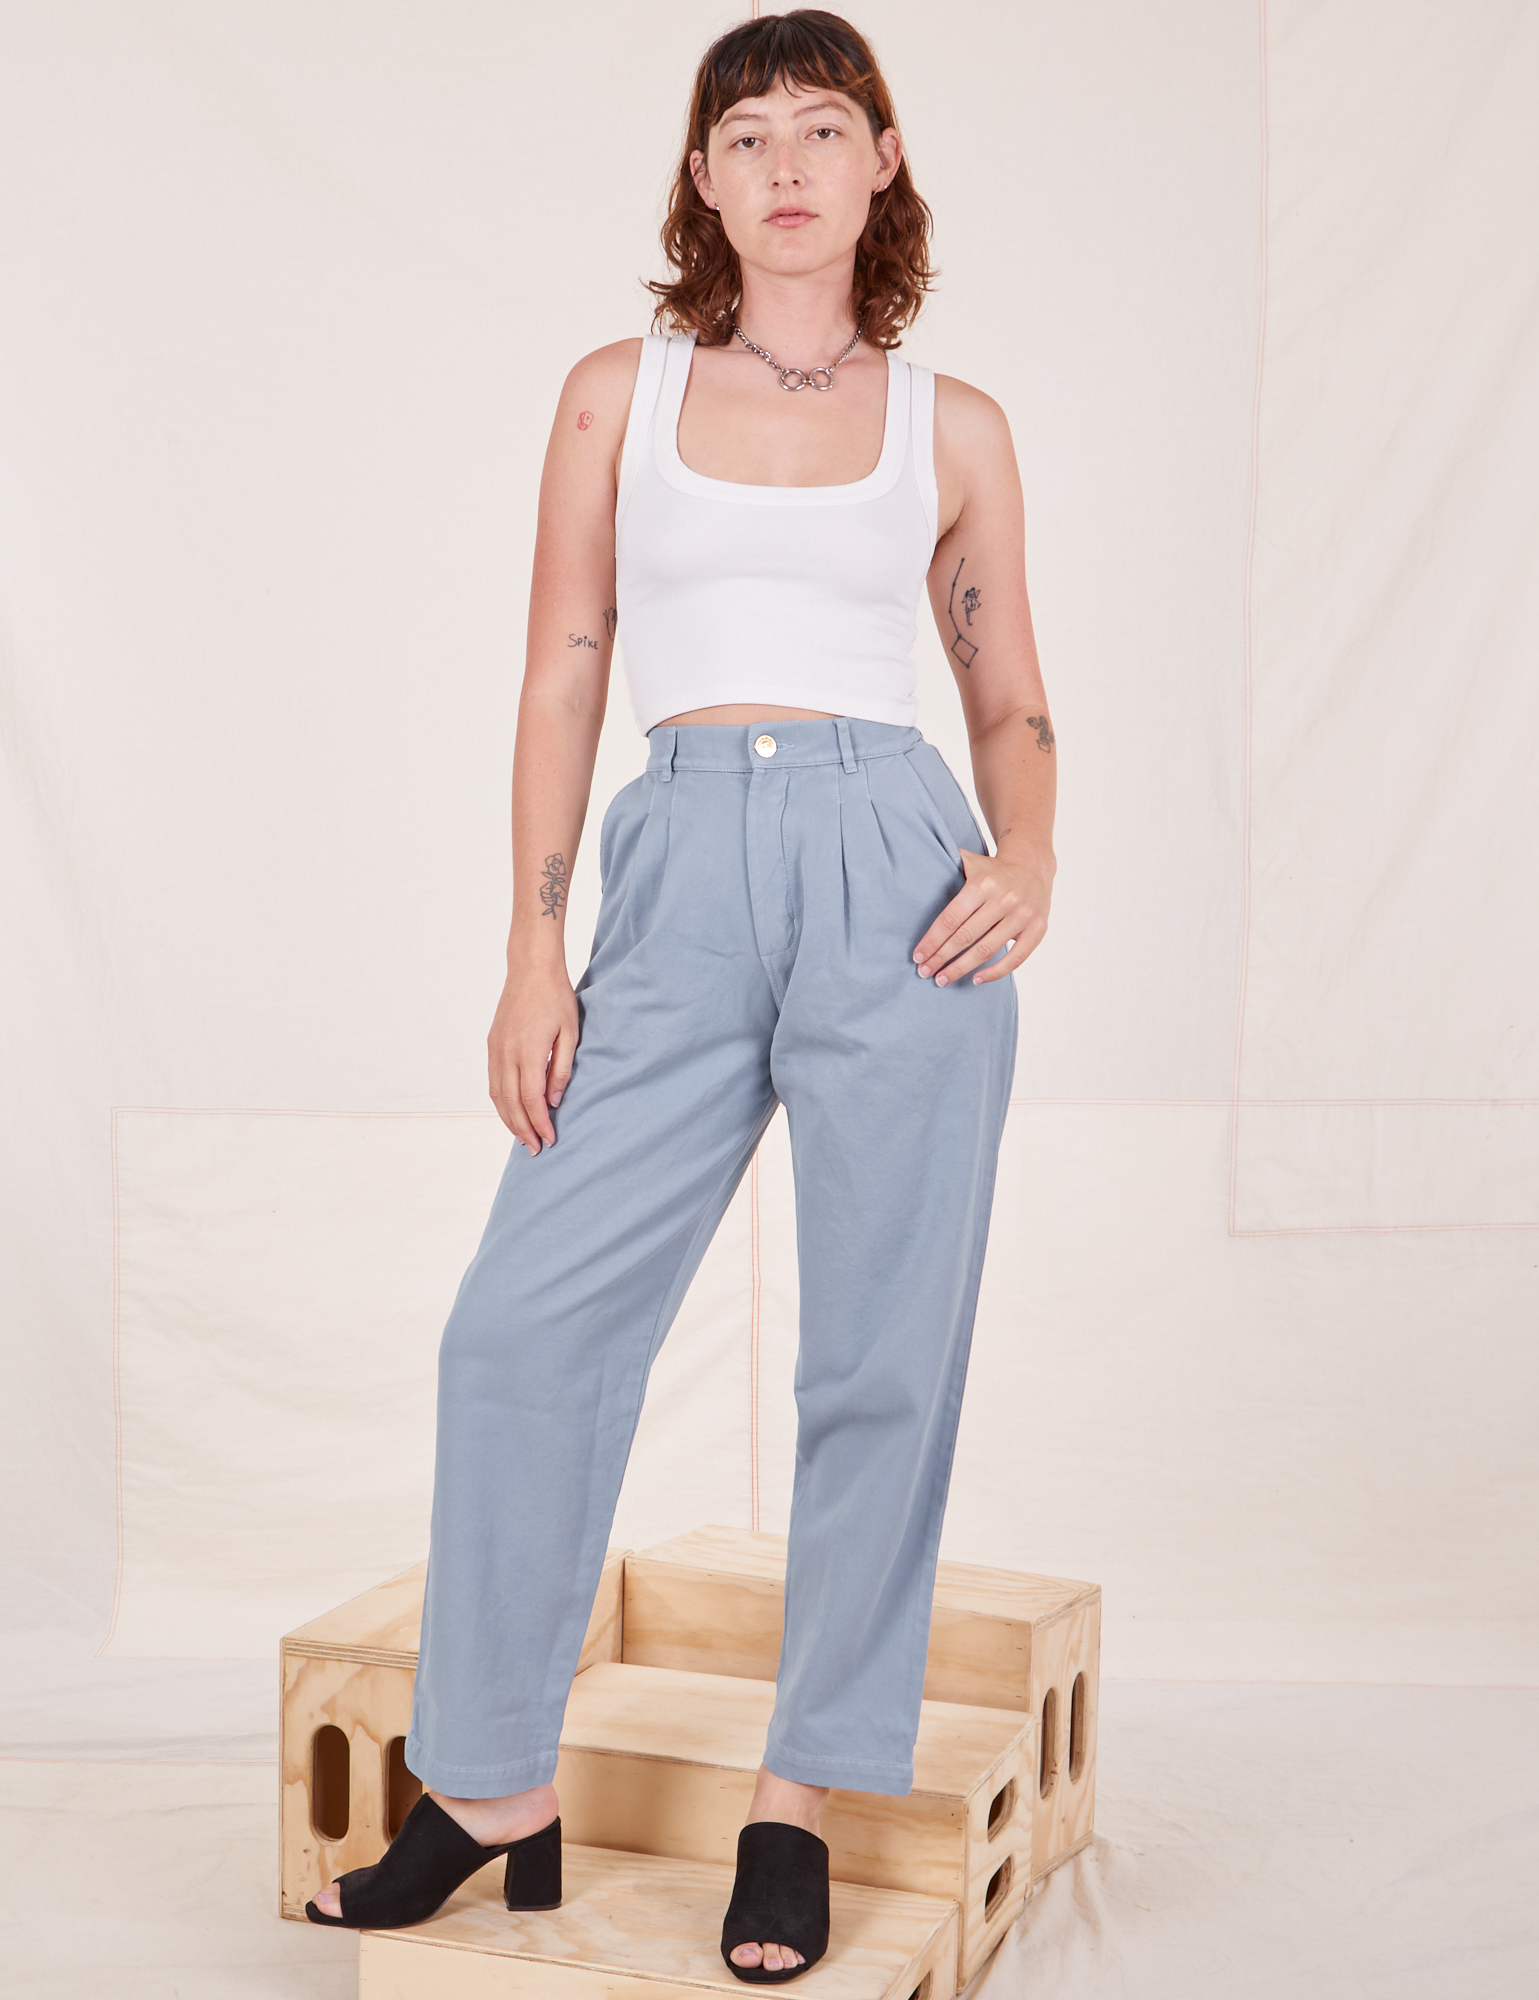 Alex is wearing Organic Trousers in Periwinkle and Cropped Tank Top in vintage tee off-white